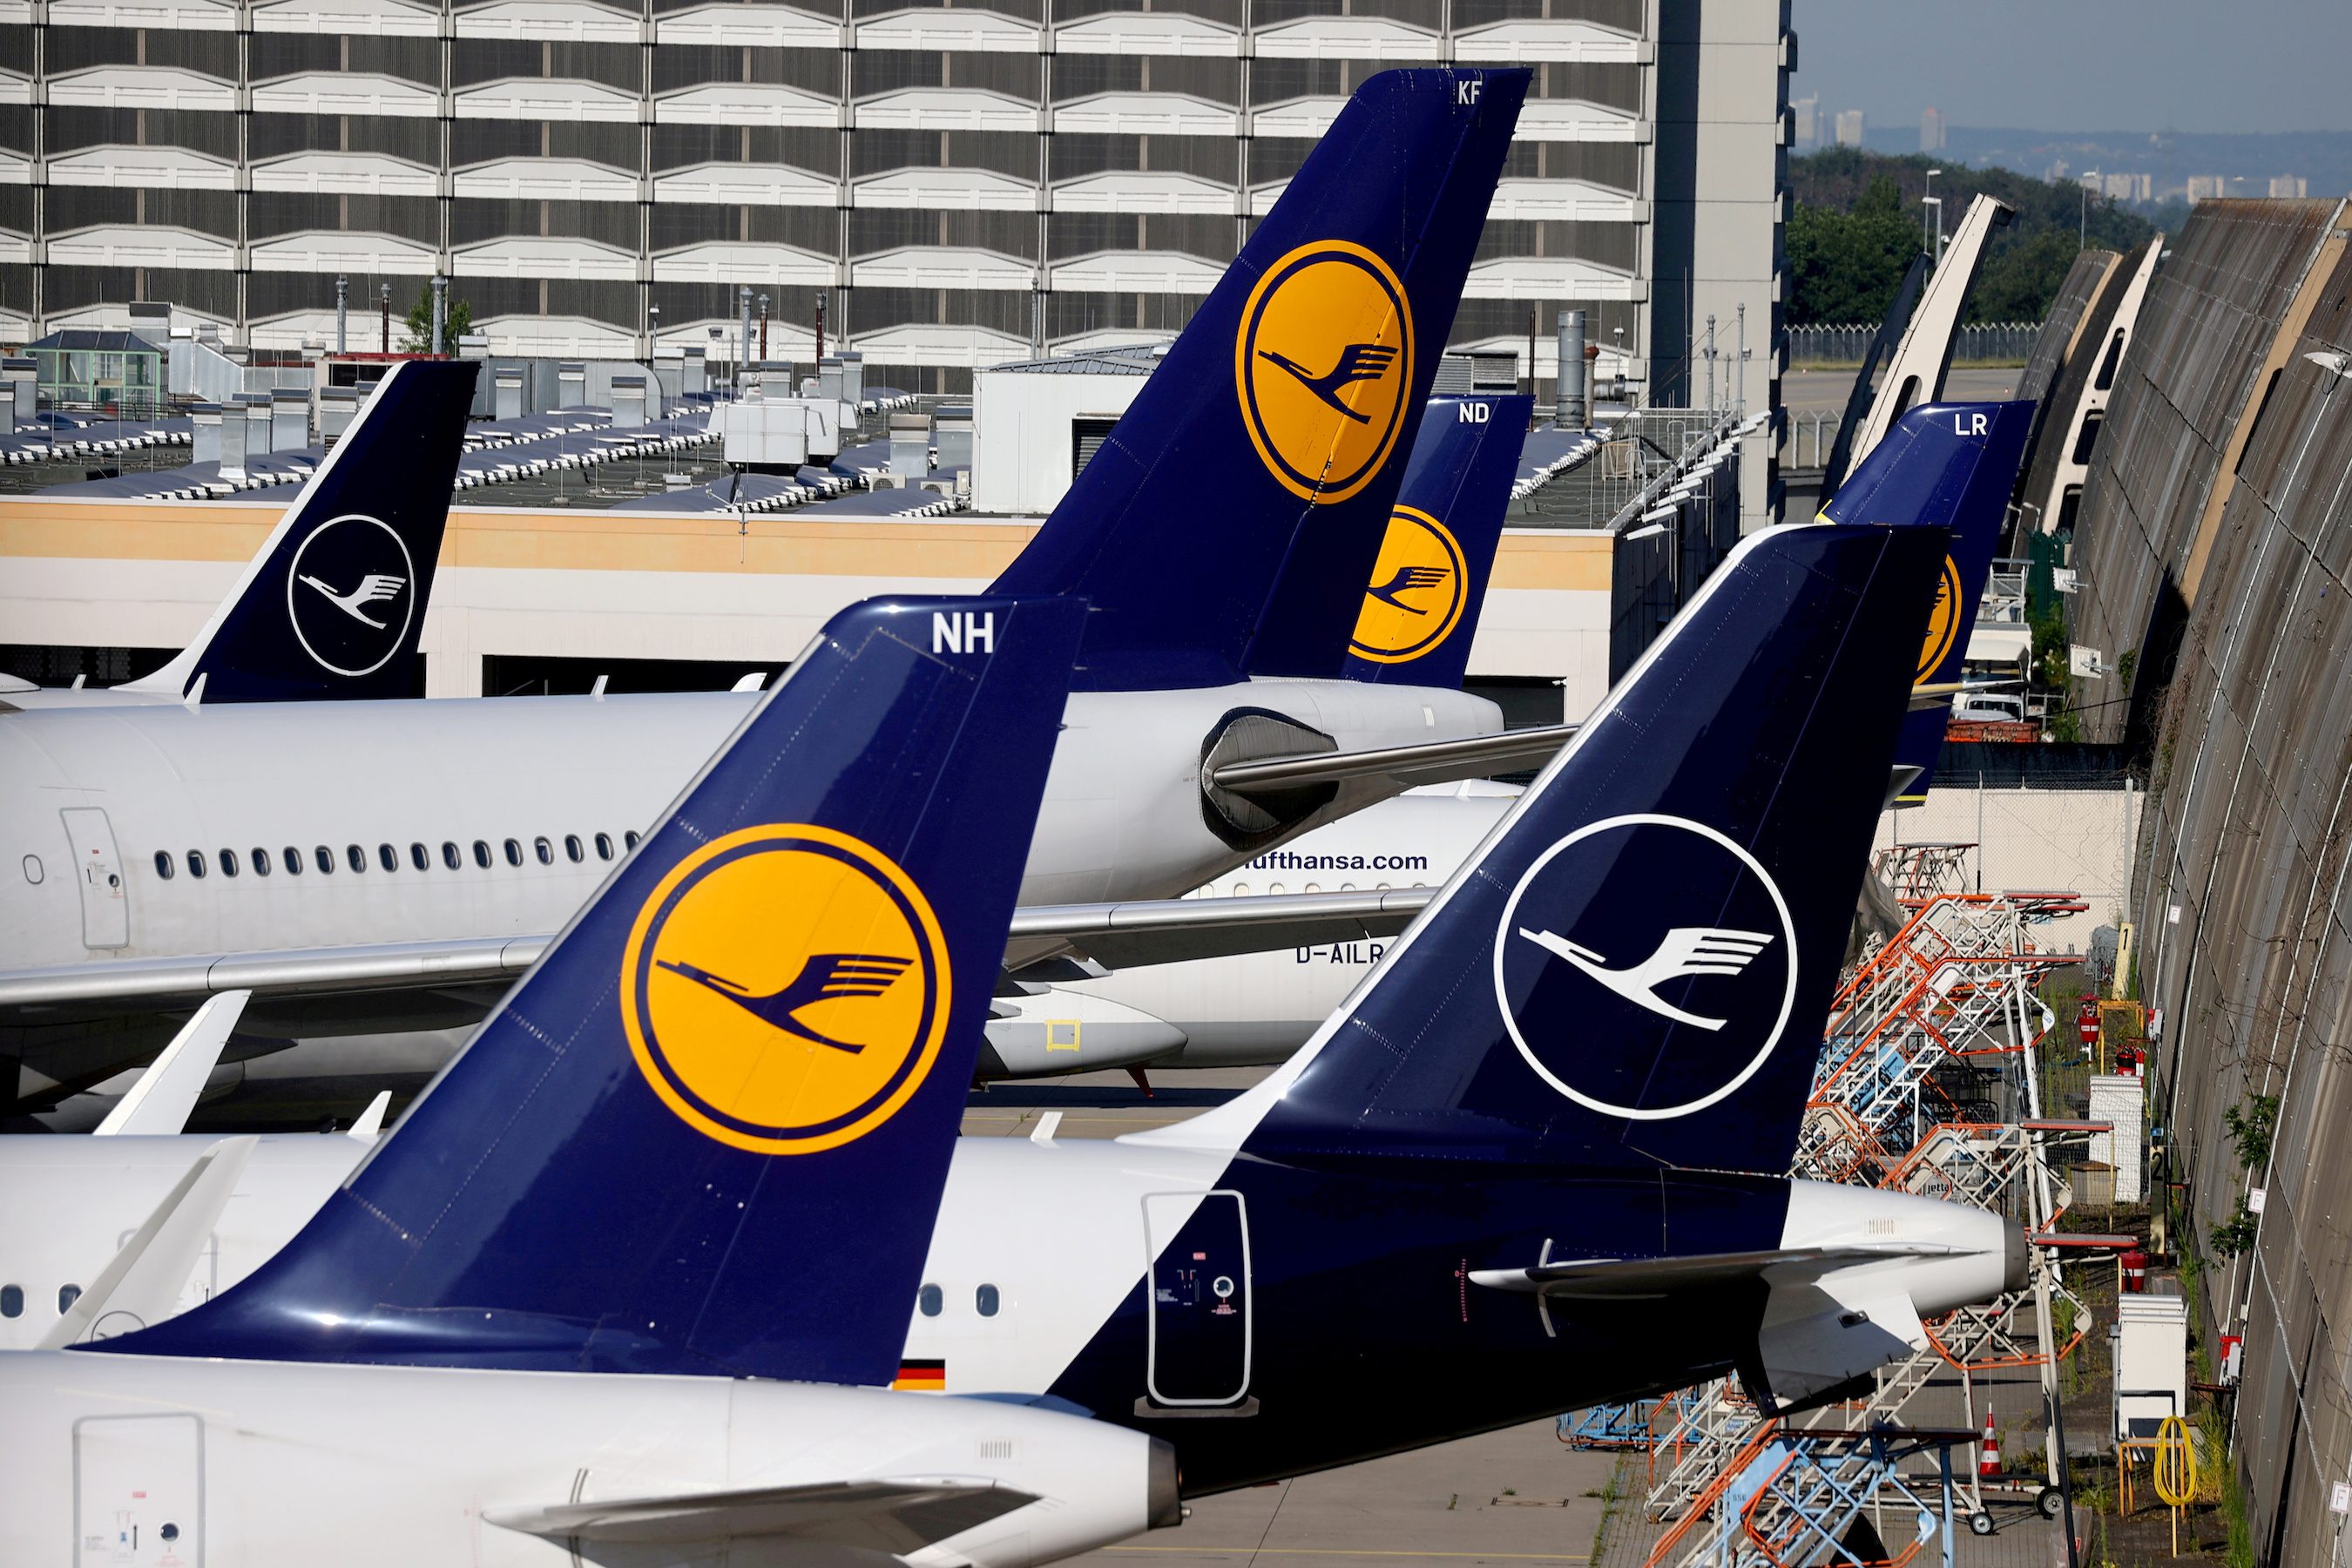 Lufthansa weighs faster plane retirements after record loss